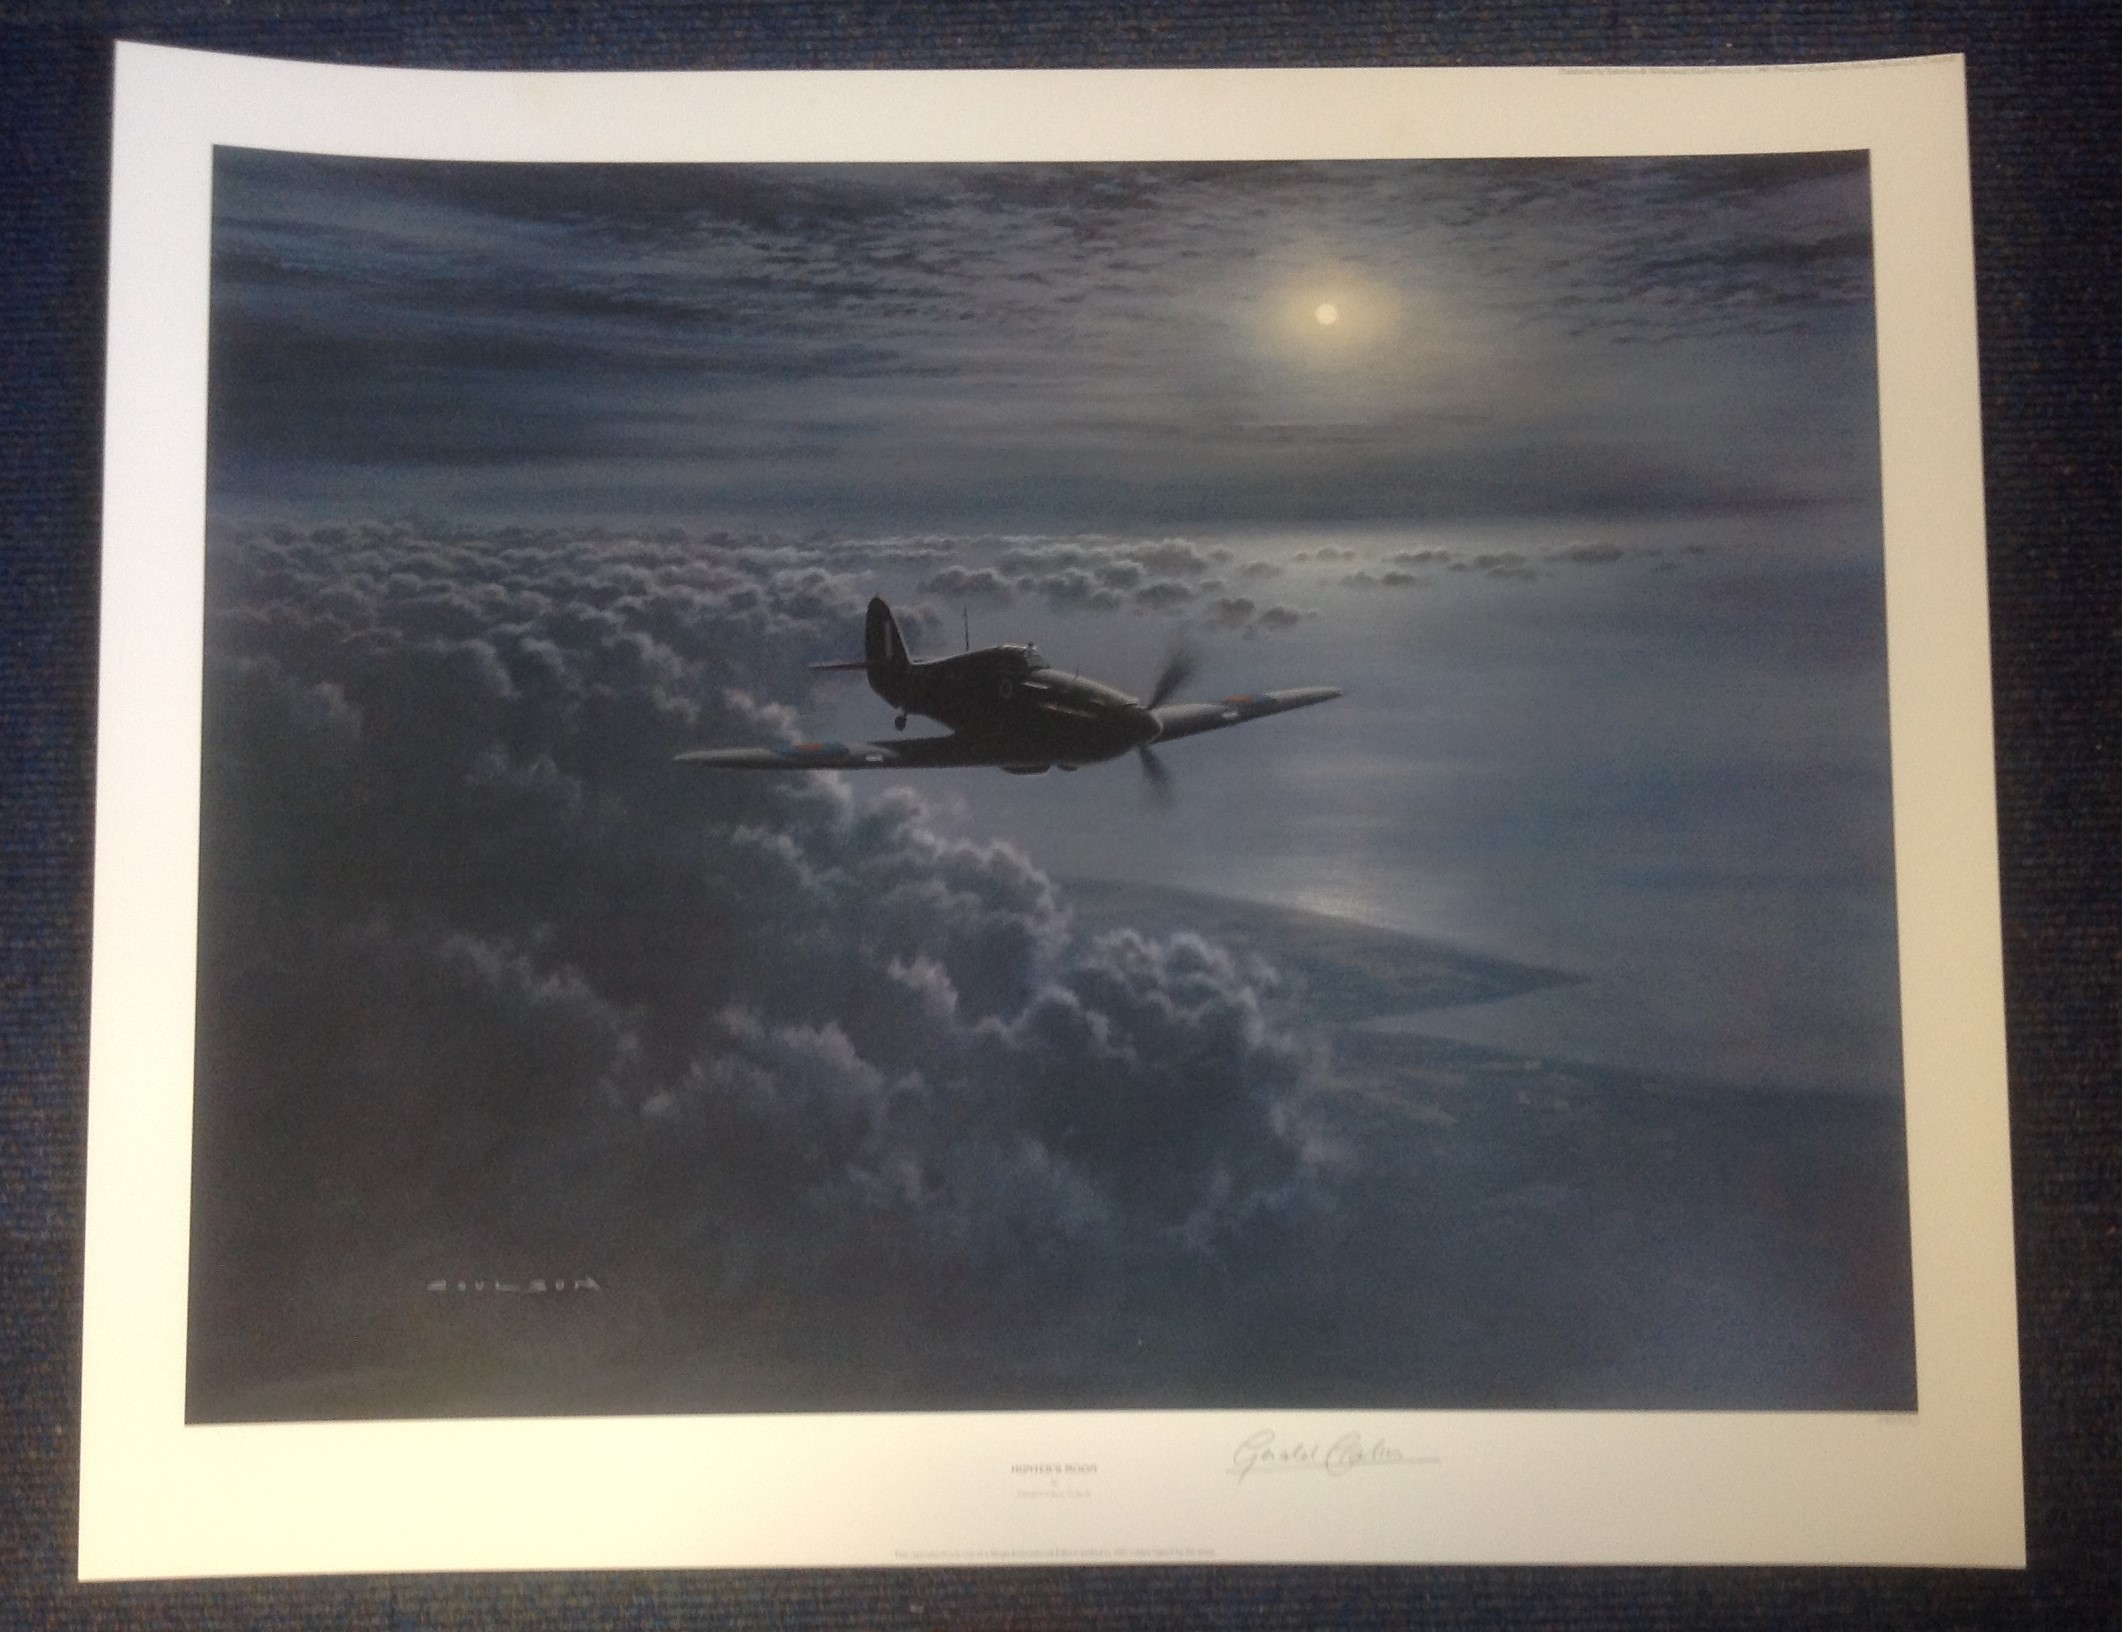 Battle of Britain print 24x29 titled Hunters Moon signed in pencil by the artist Gerald Coulson.